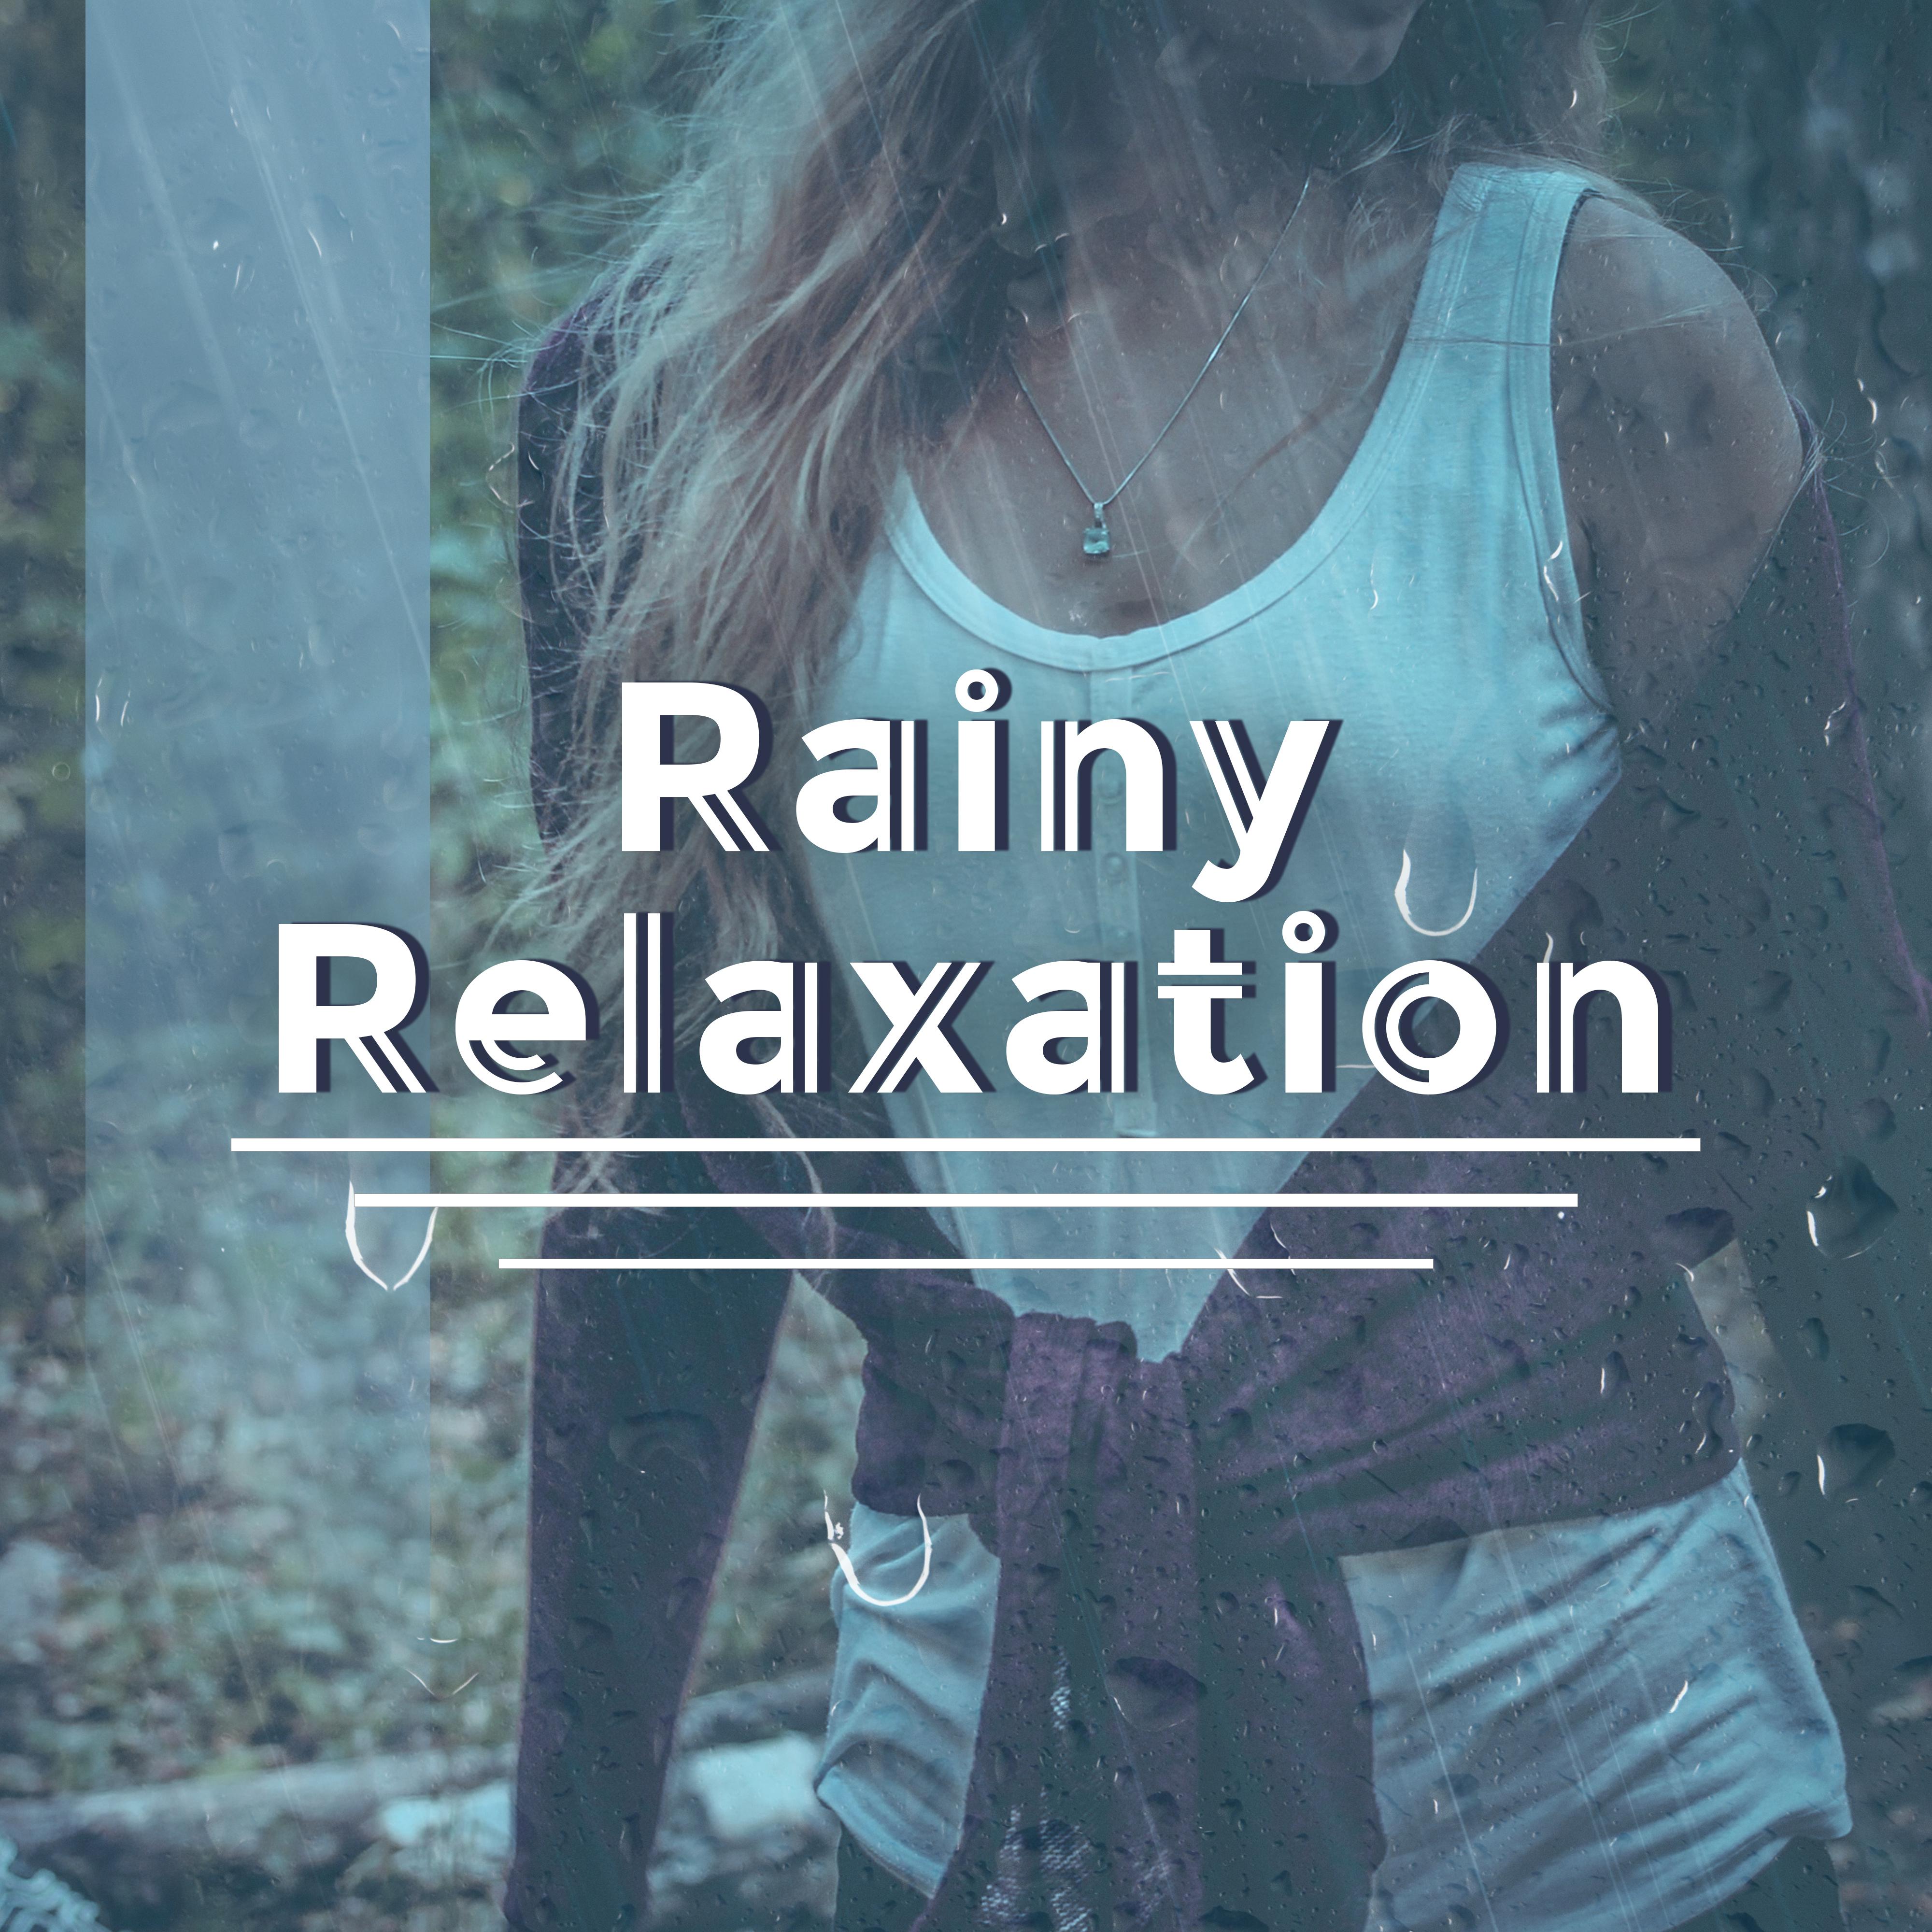 Rainy Relaxation – New Age 2017, Relaxing Music, Rest, Calming Sounds for Massage Background